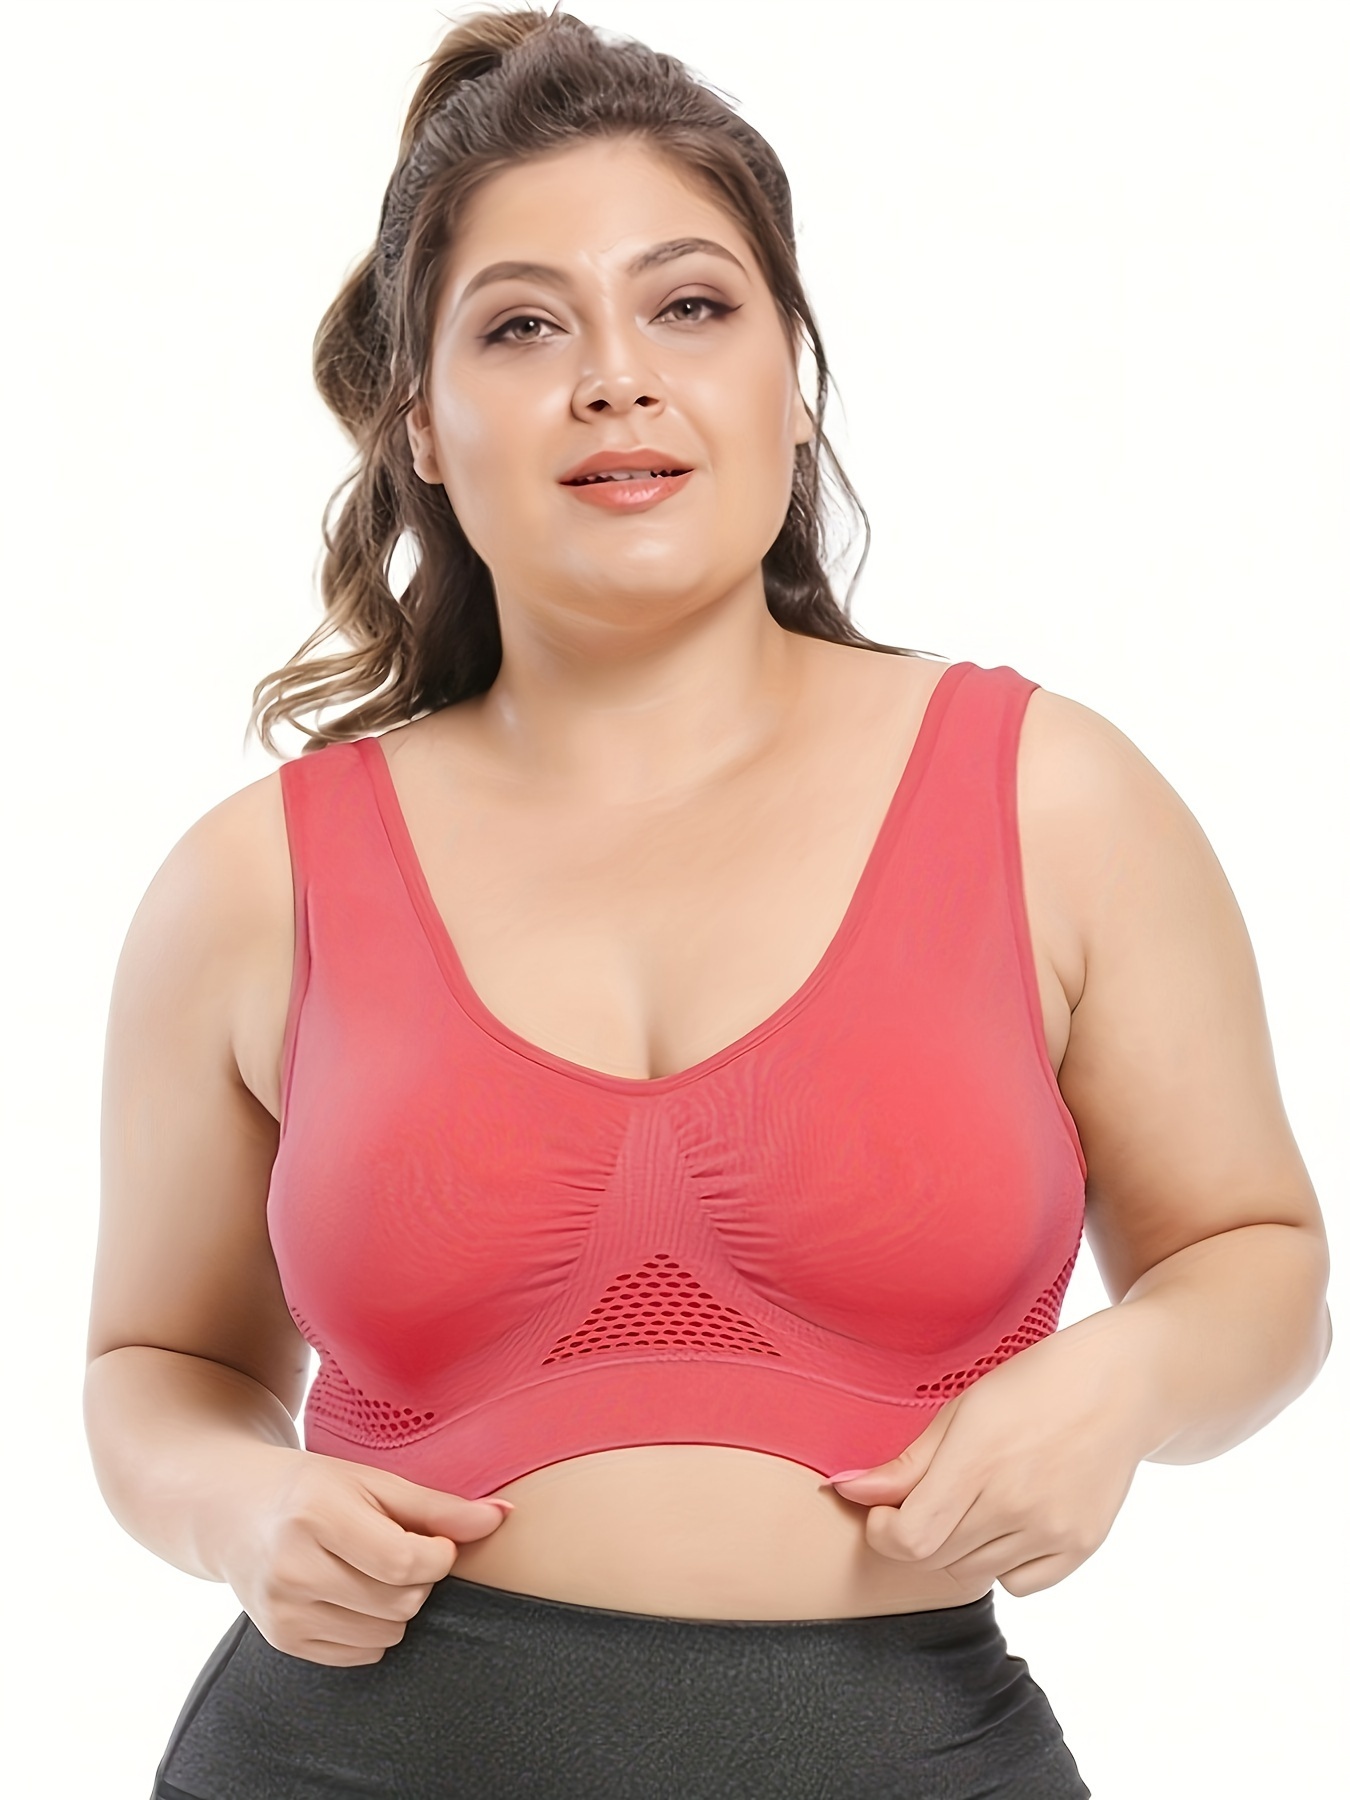 Cheap Seamless Bra with Pads Plus Size Bras for Women Active Bra Wireless  Brassiere Push Up Big Size Vest